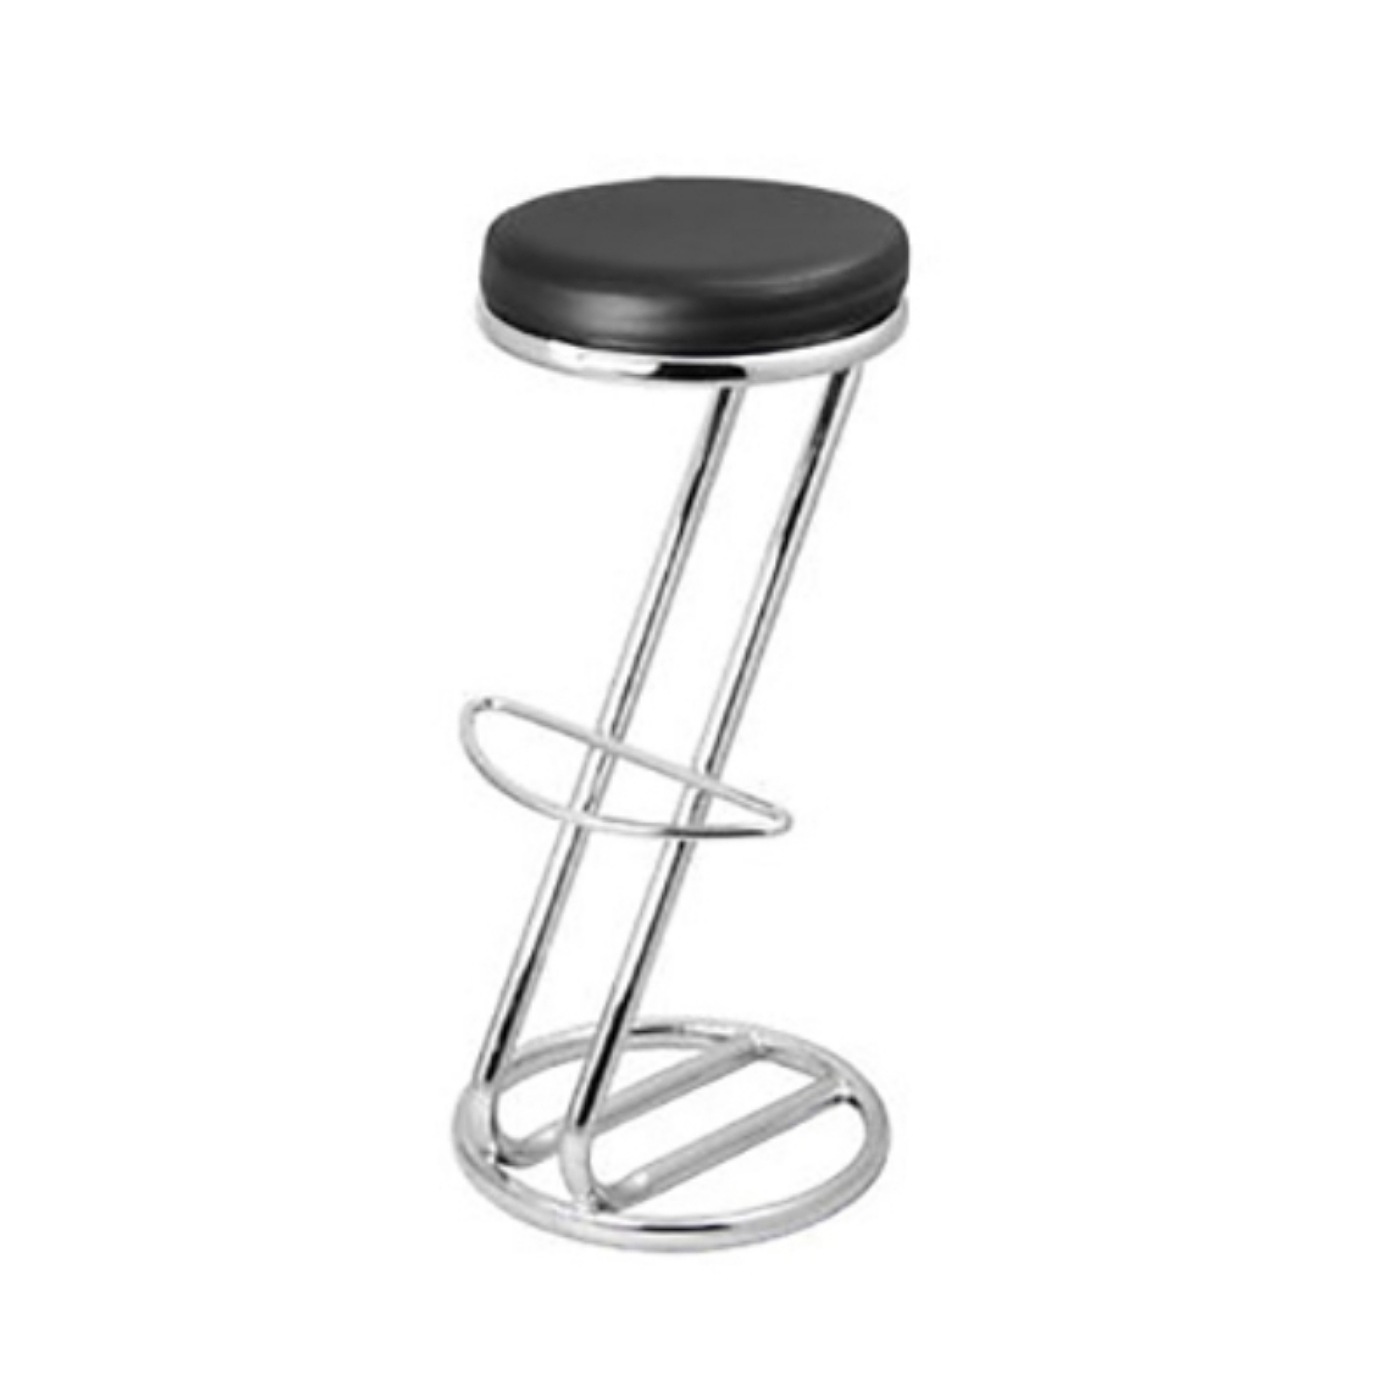 Bar Stool With A Silver Steel Base And A Black Round Cushion.